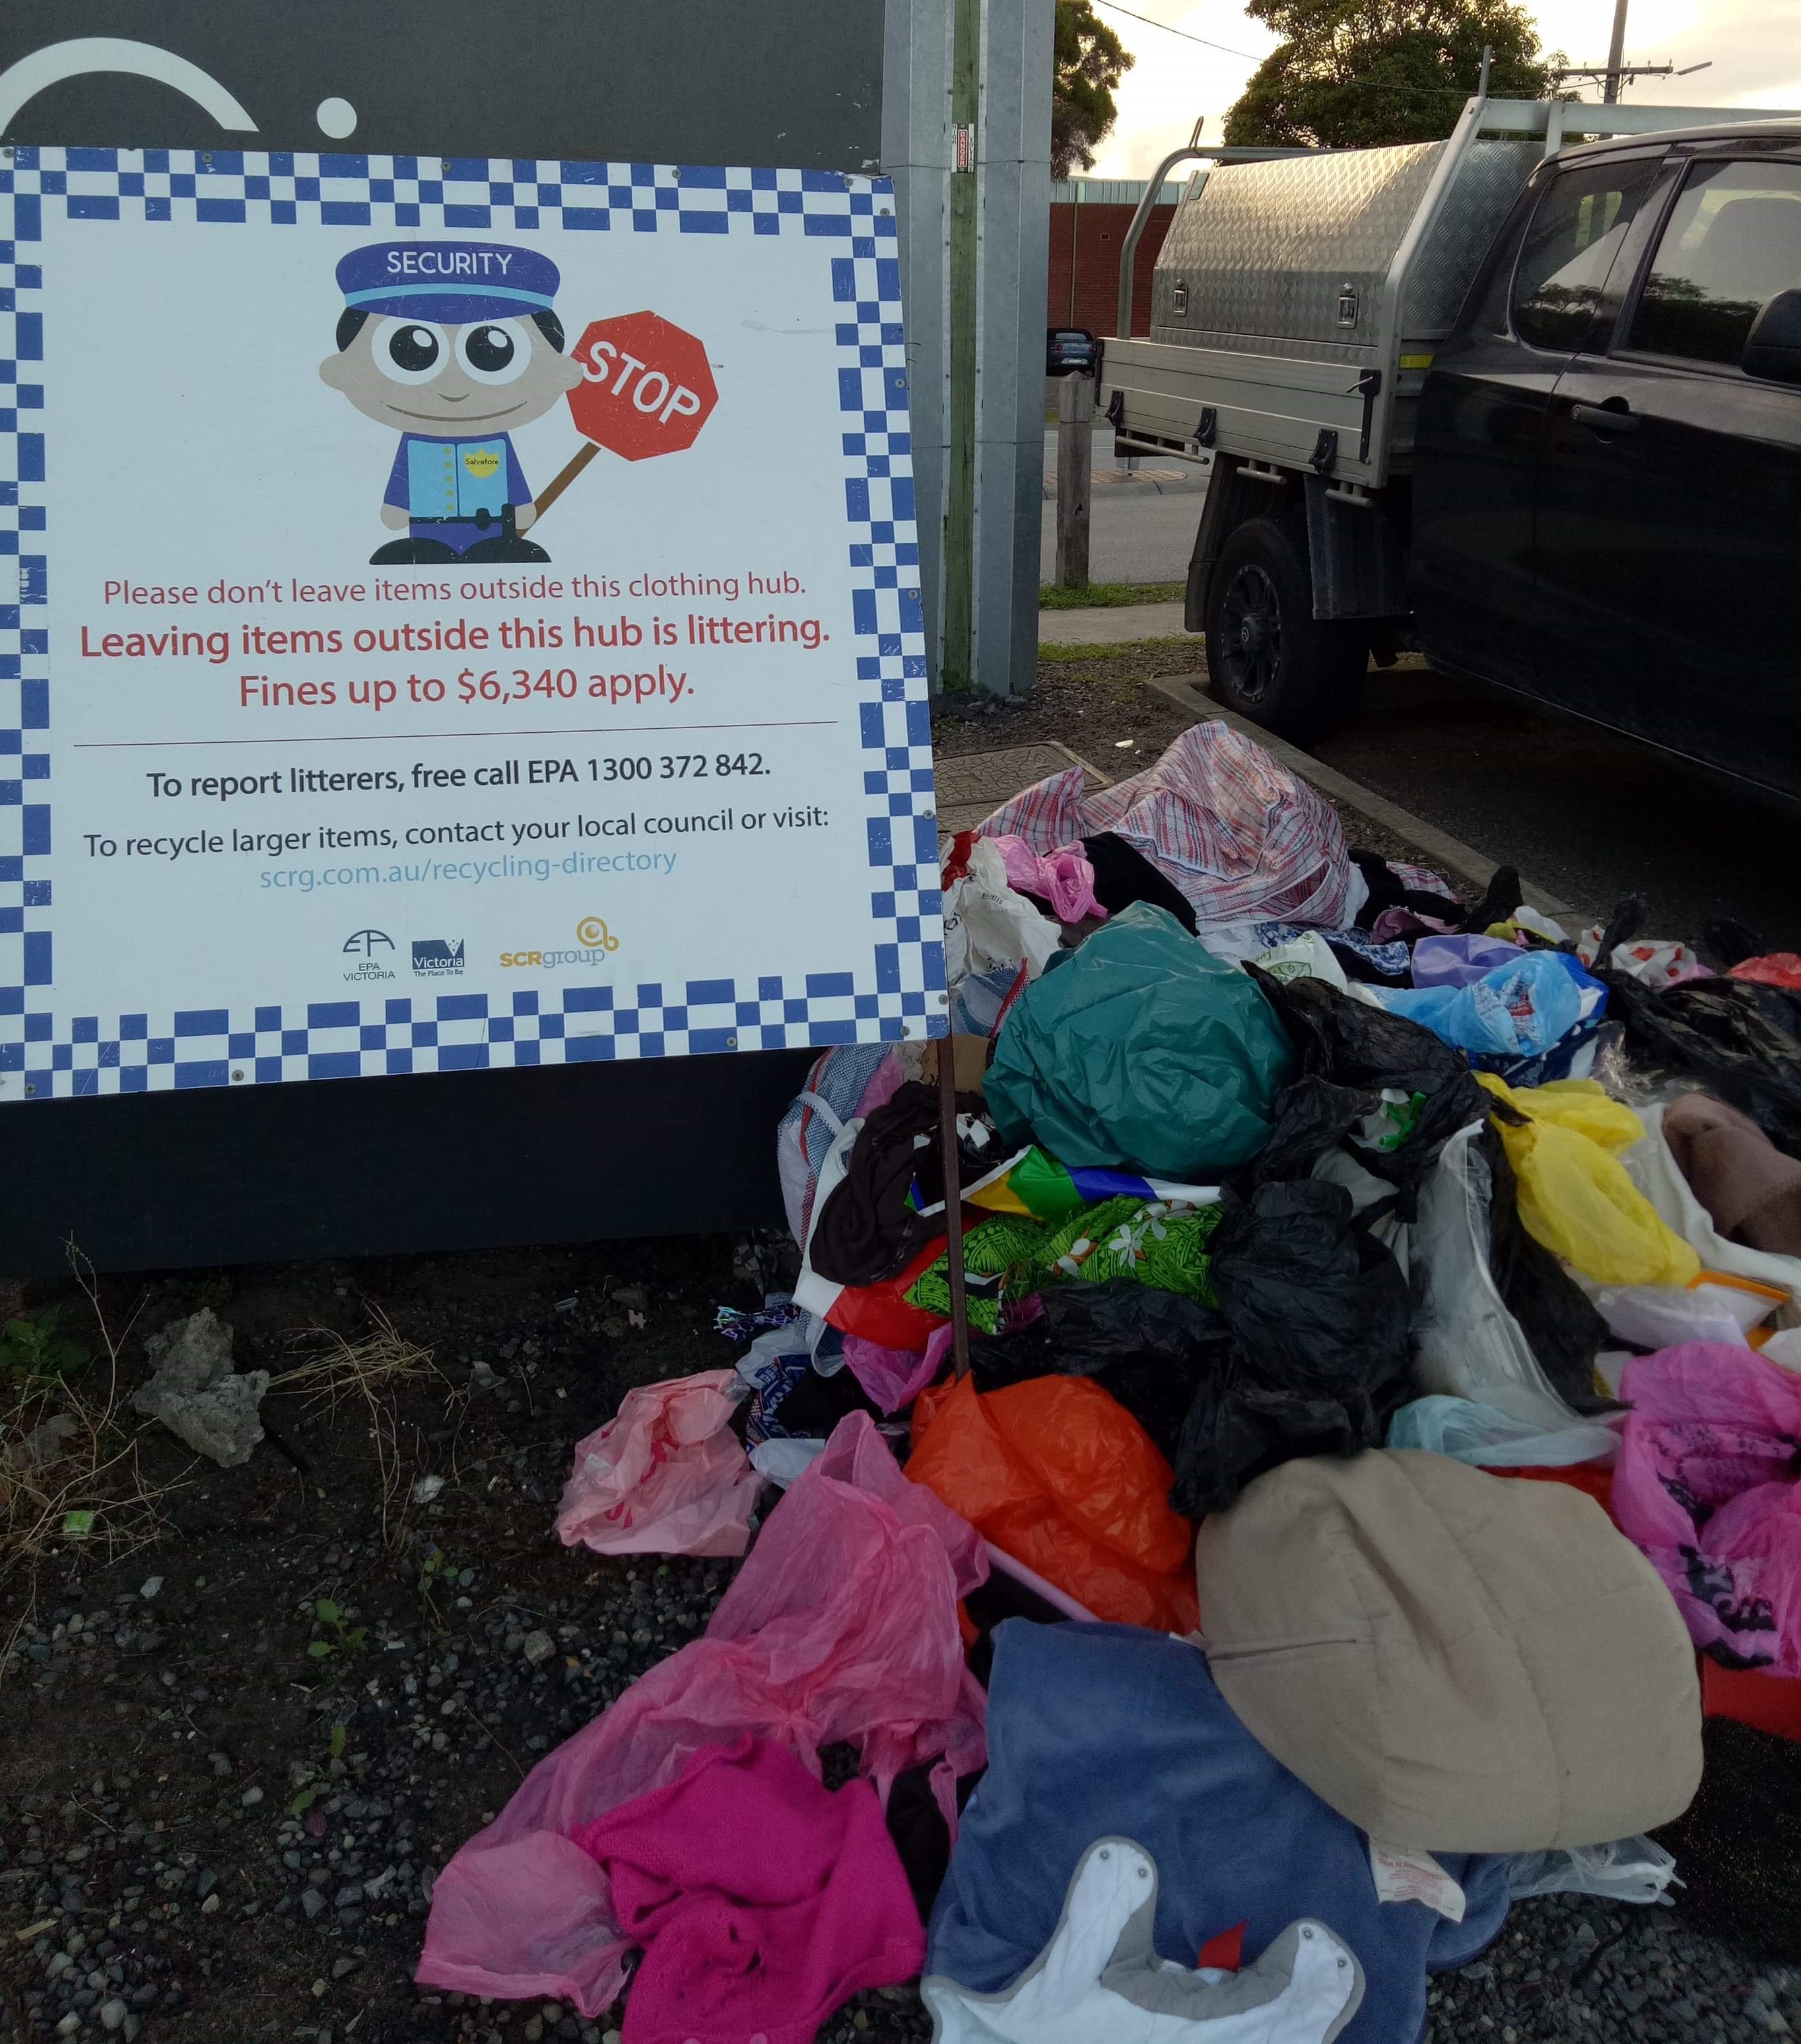 toddler - Please don't wave terms butside this clothing Leaving items outside this hub is littering Fines up to $6,340 apply. To report litterers, free call Epa 1300372842 To recycle larger items, contact your local councilor